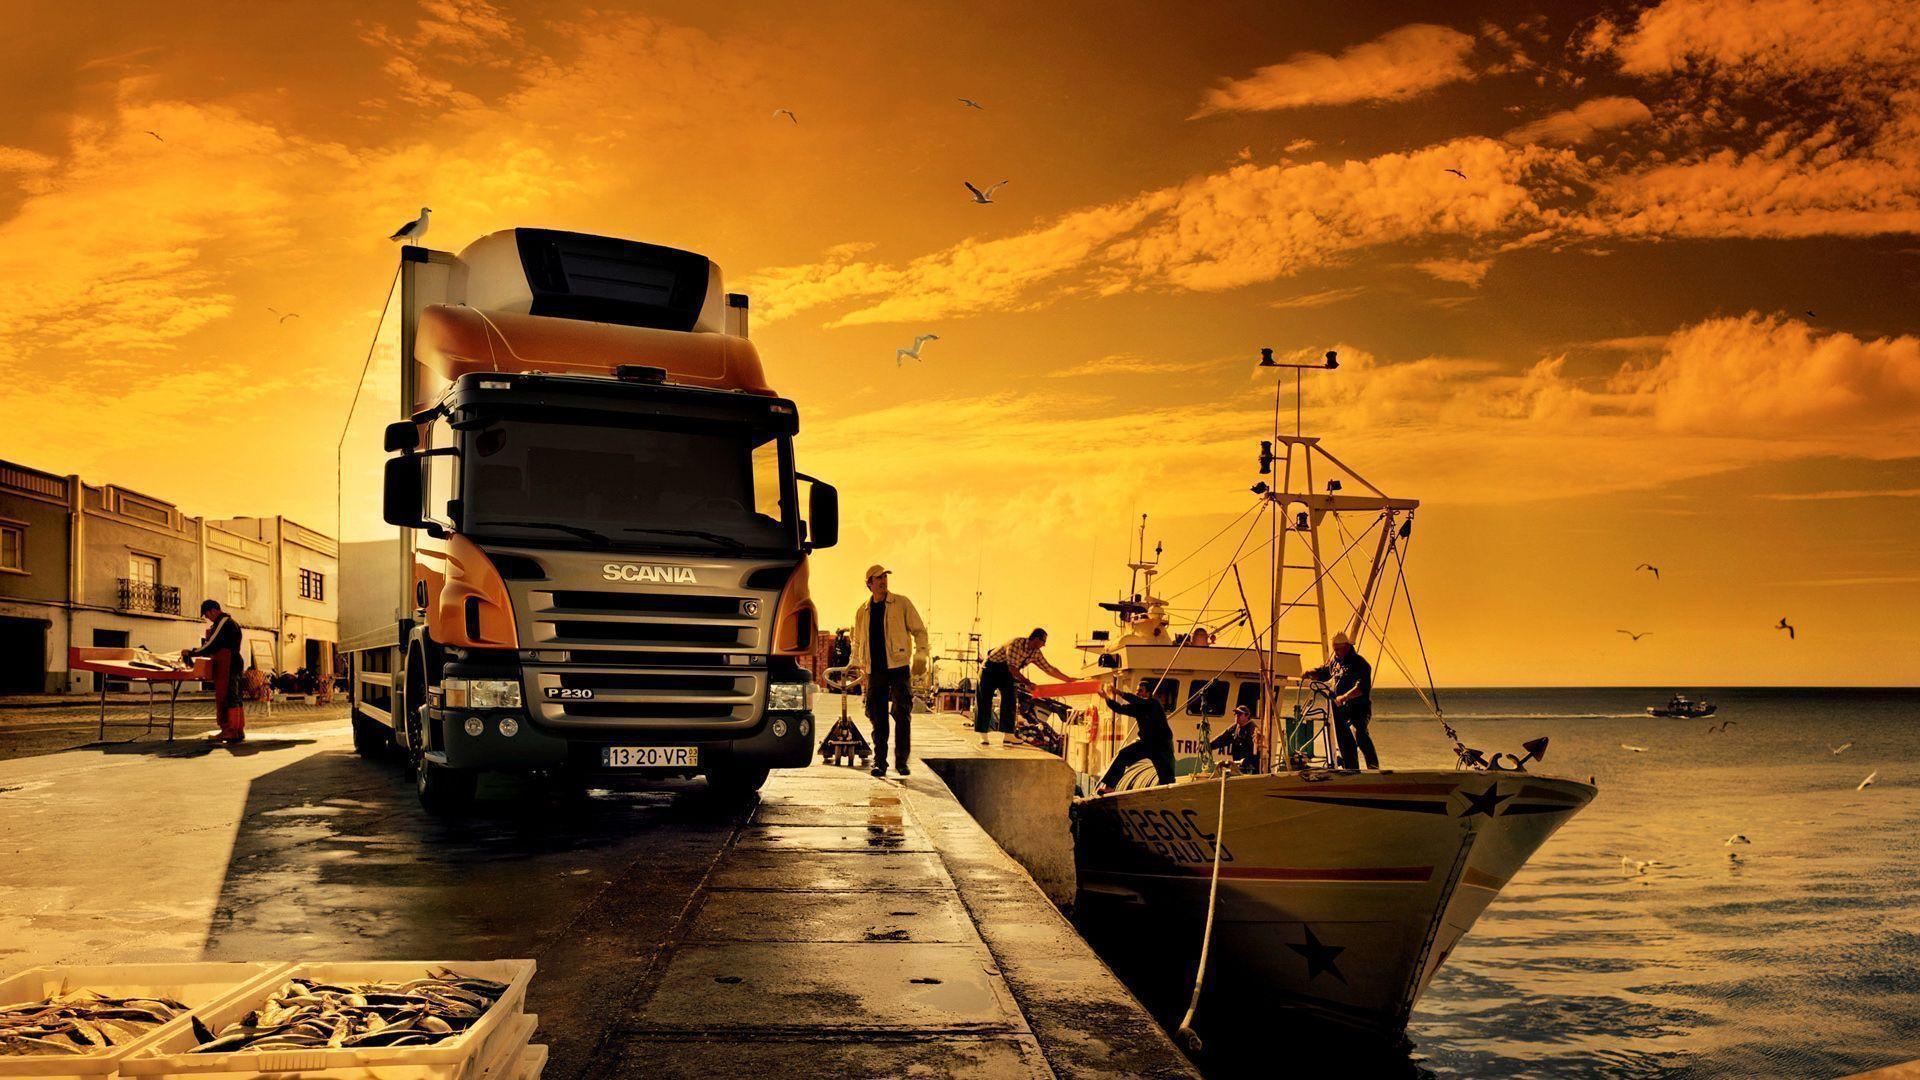 Awesome Orange Scania Truck Wallpaper PC Wallpaper. High